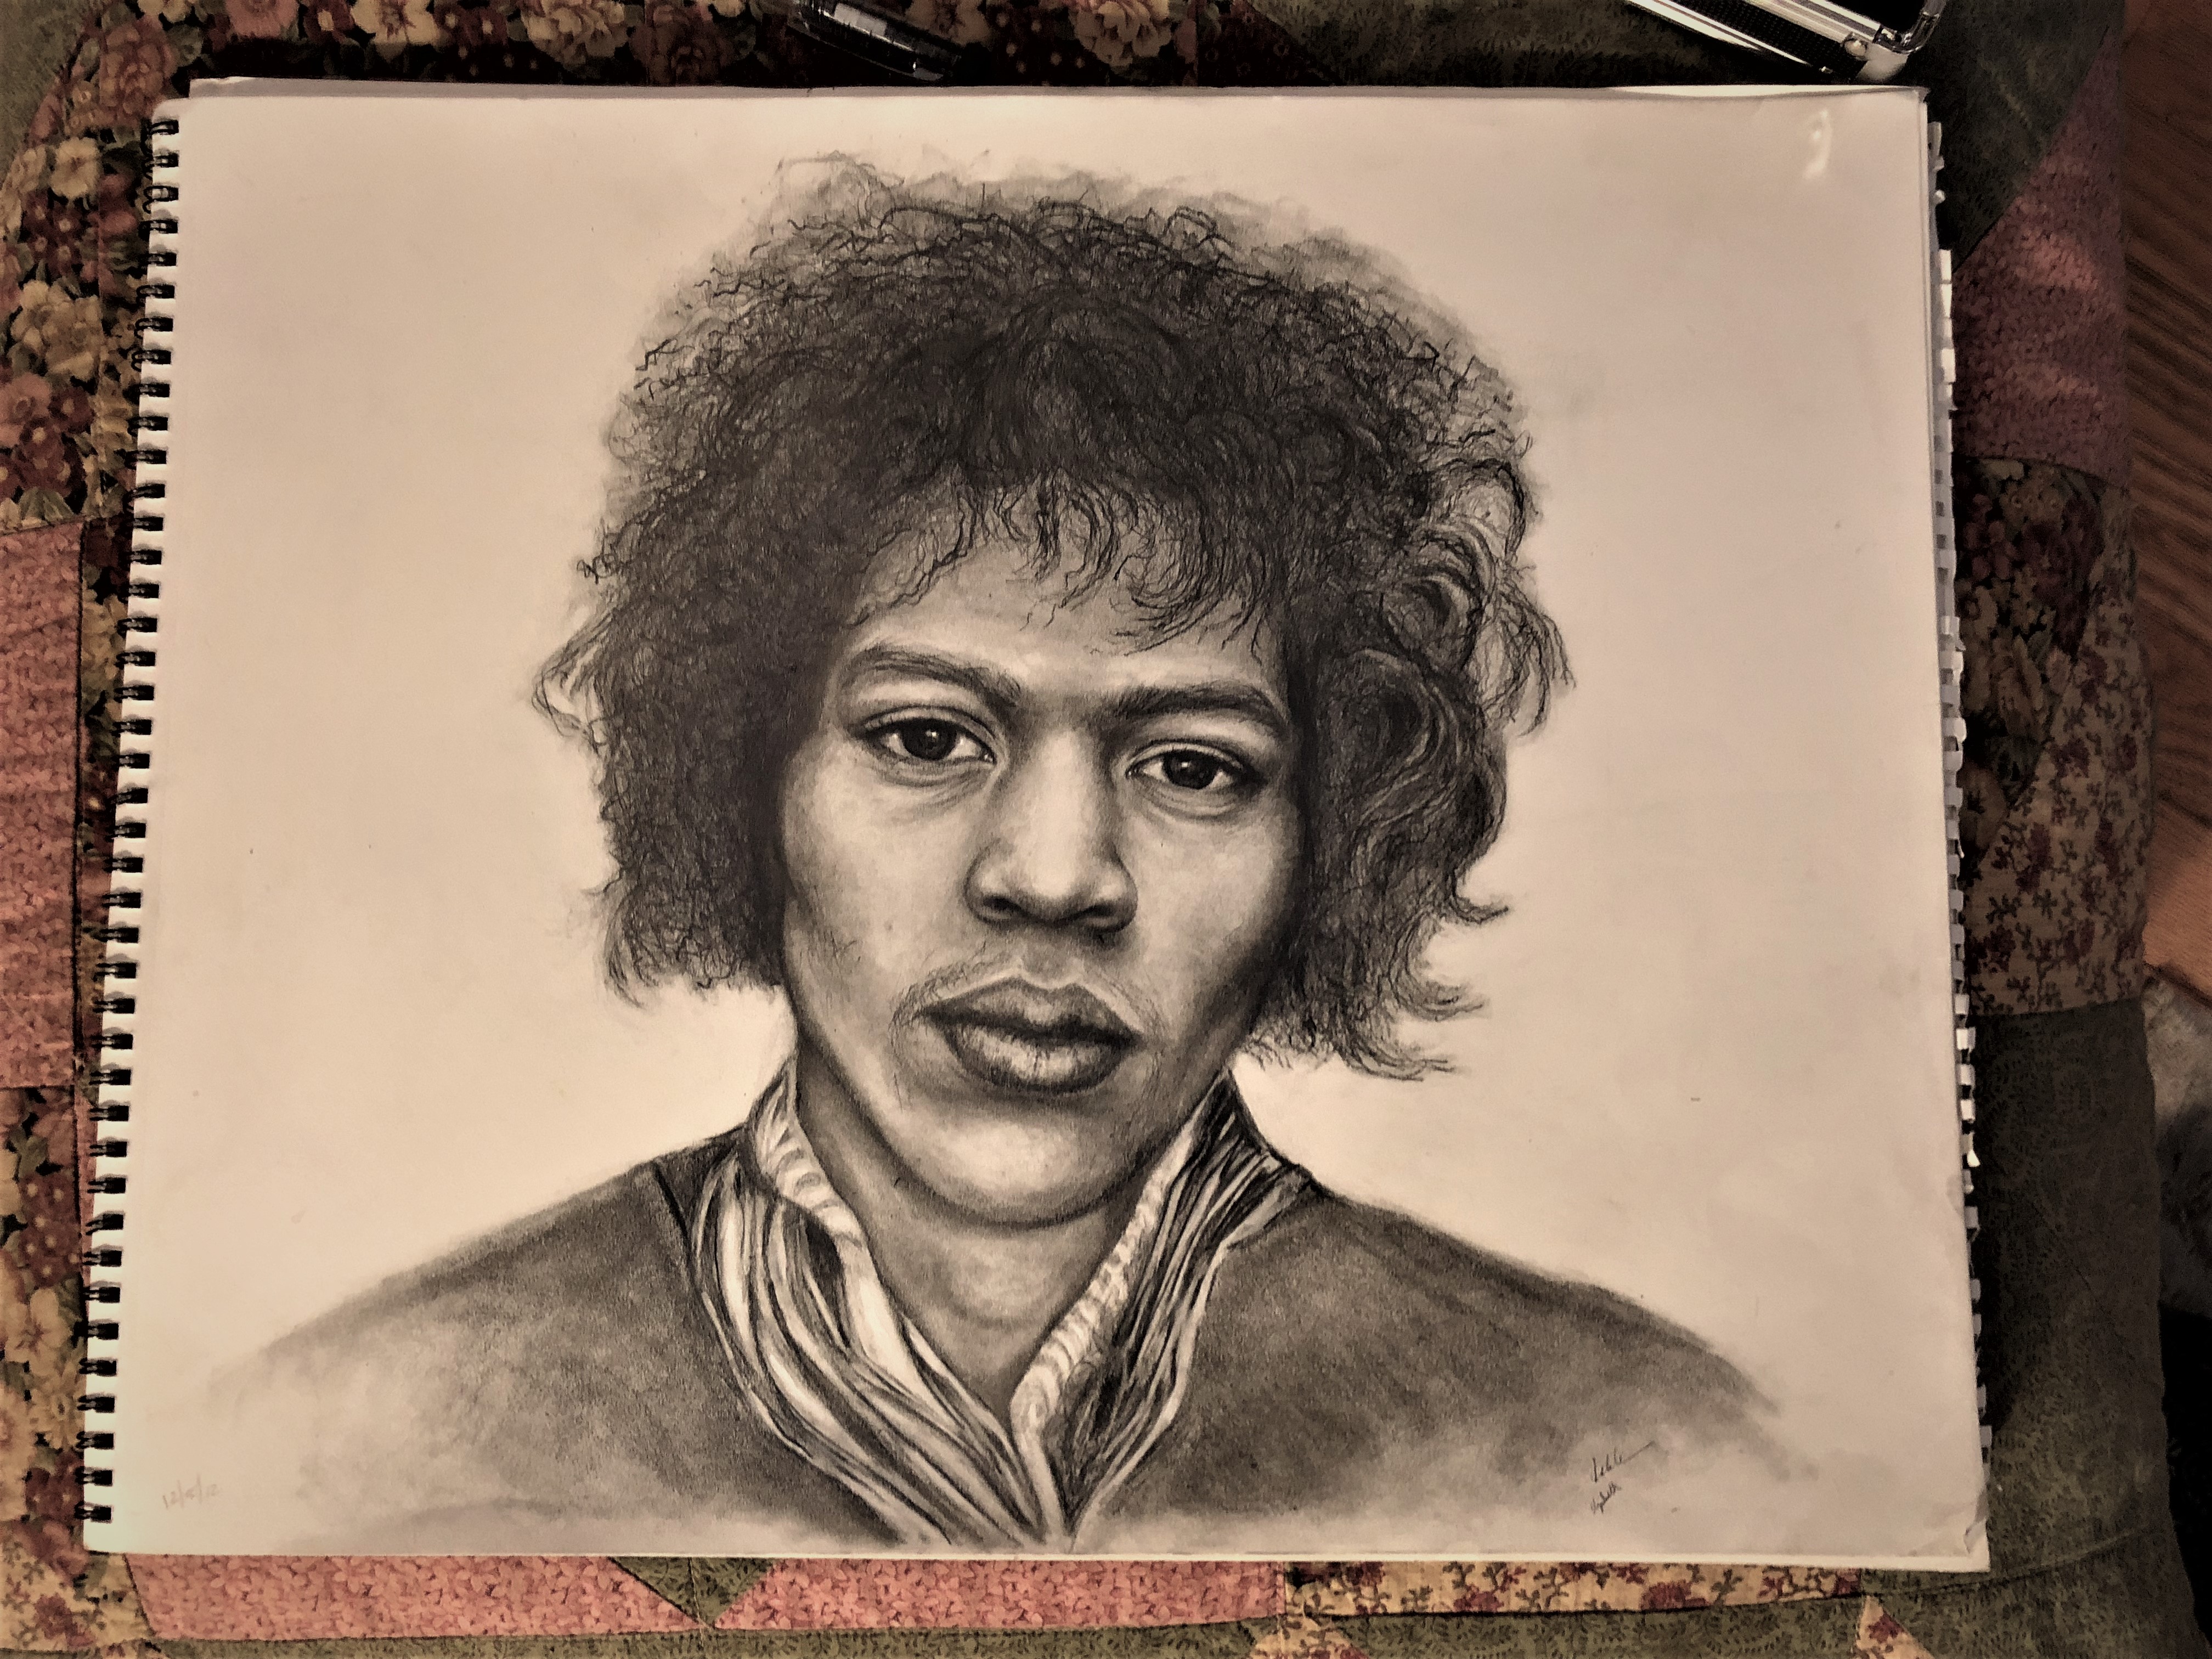 Jimi Hendrix by Lahle and Elizabeth Wolfe